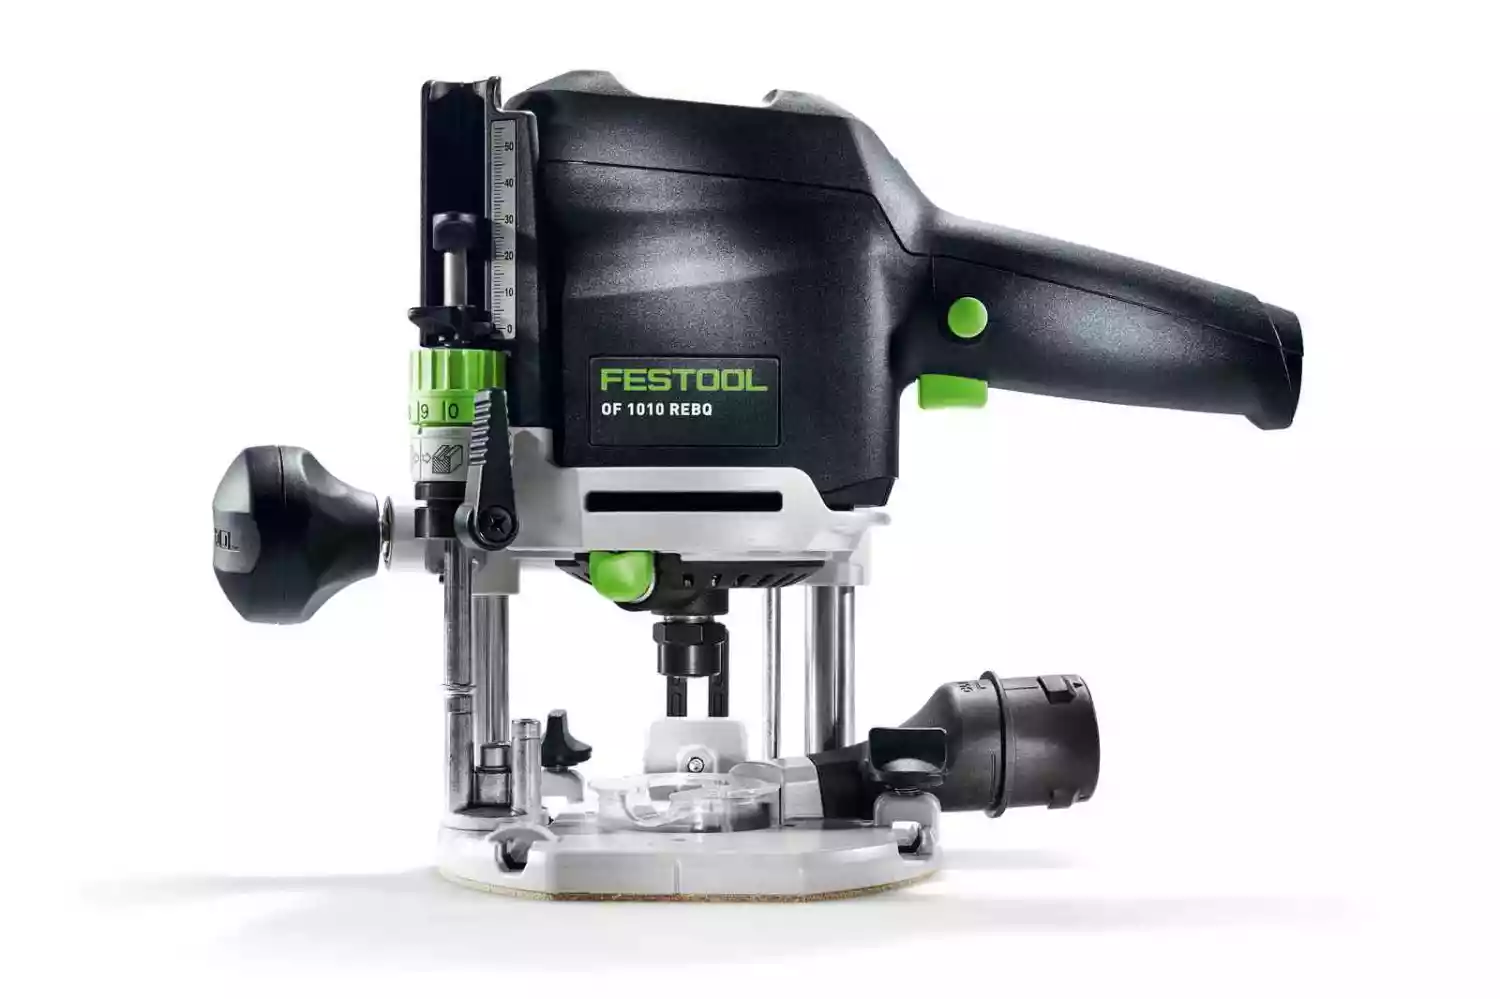 Festool OF 1010 REBQ-Set+Box Bovenfrees in systainer incl. geleiderail 1010W - 55 mm